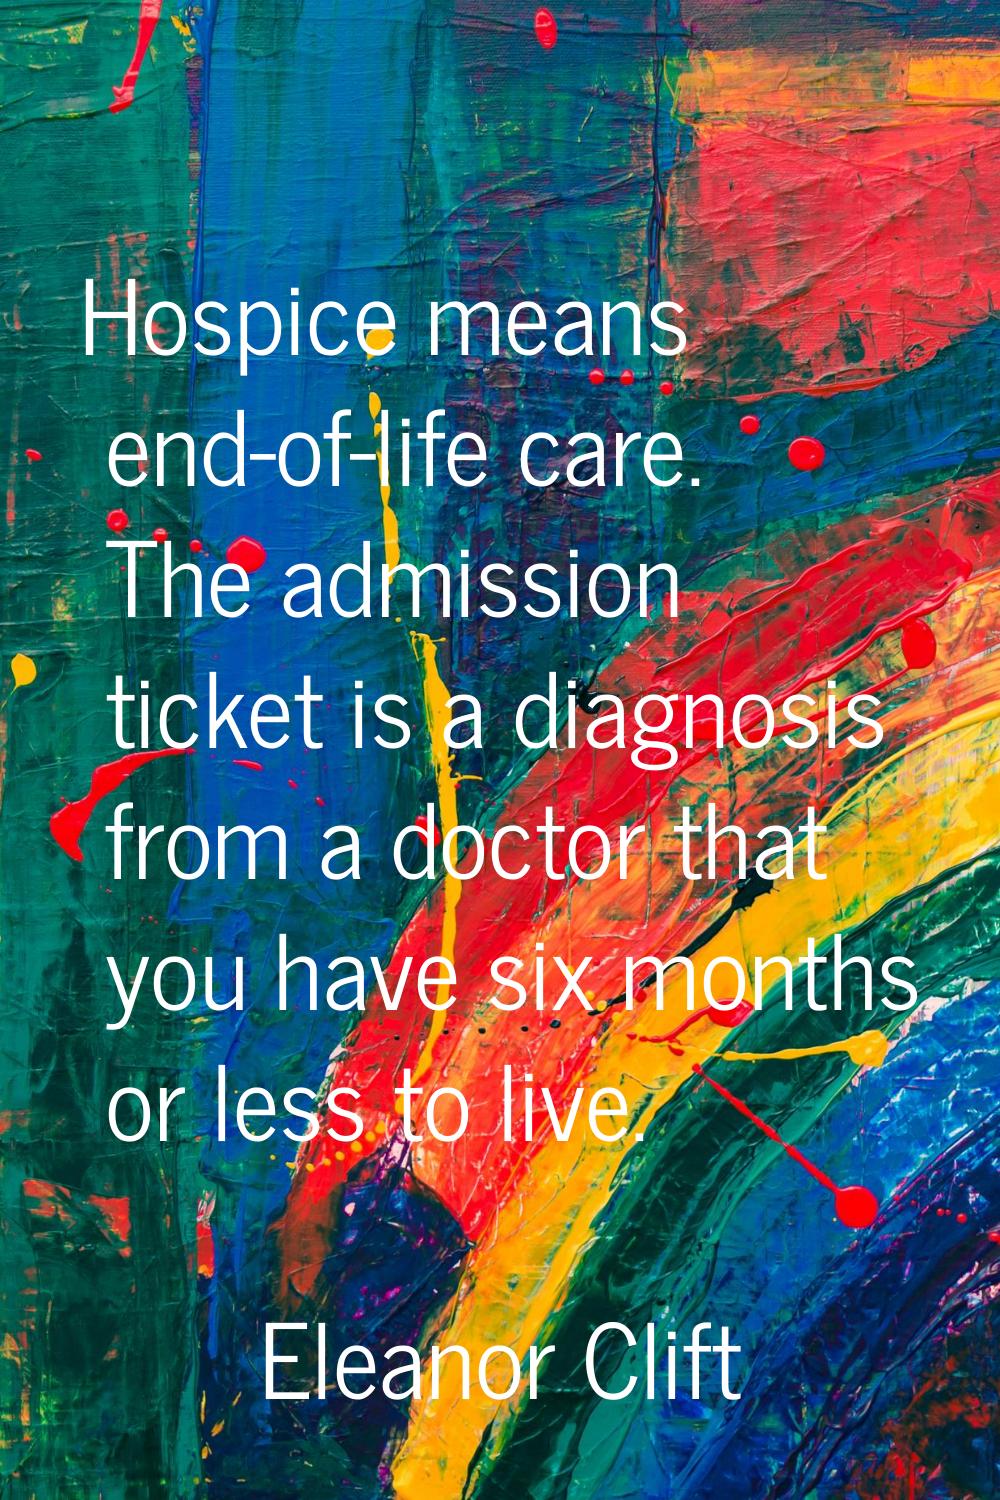 Hospice means end-of-life care. The admission ticket is a diagnosis from a doctor that you have six